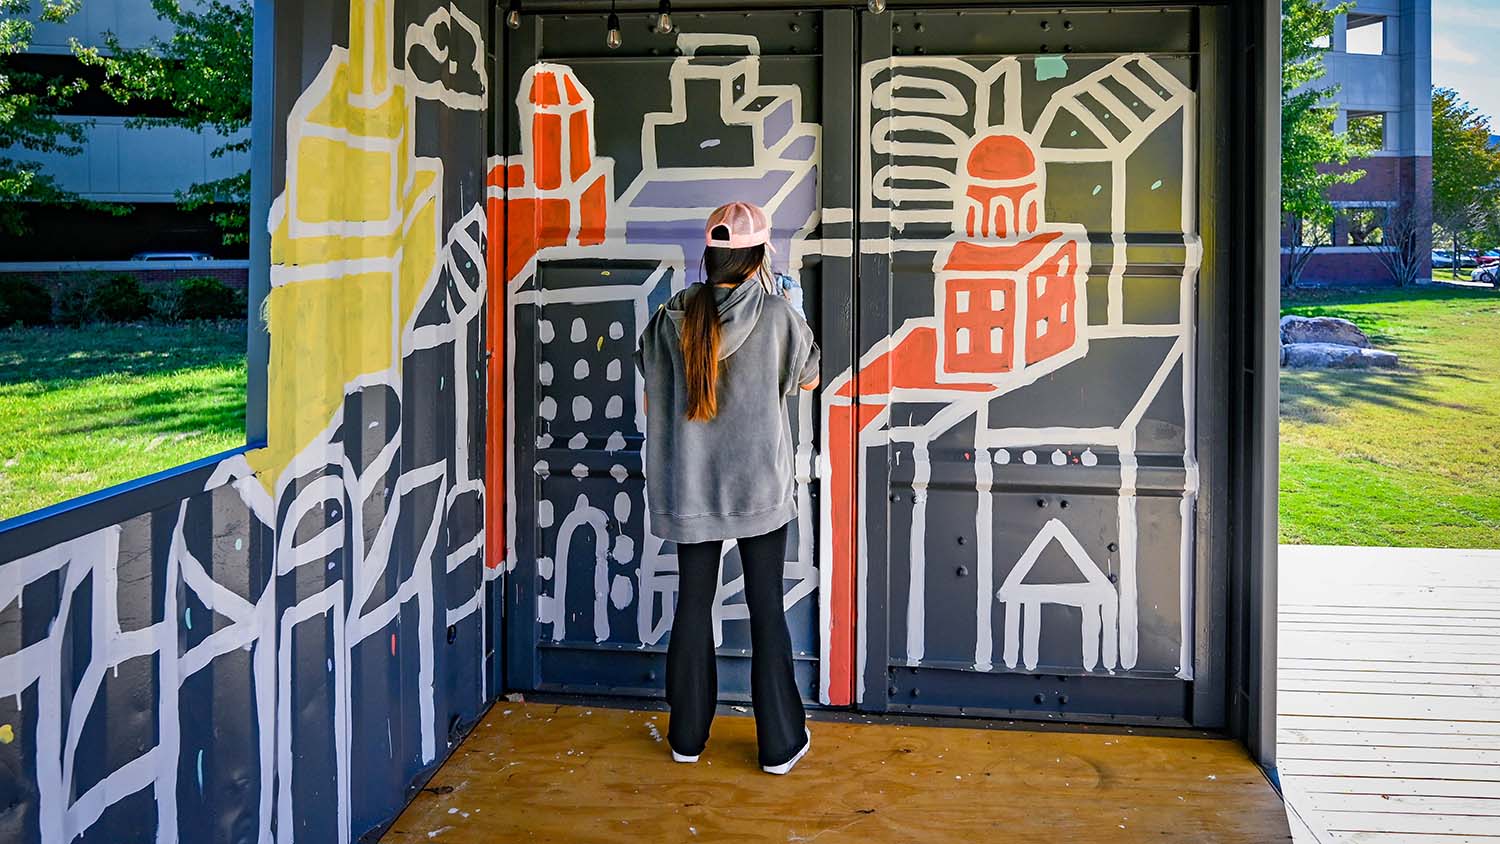 A student paints a mural in the interior of one of The Corner's shipping containers, adding a splash of color and visual interest.